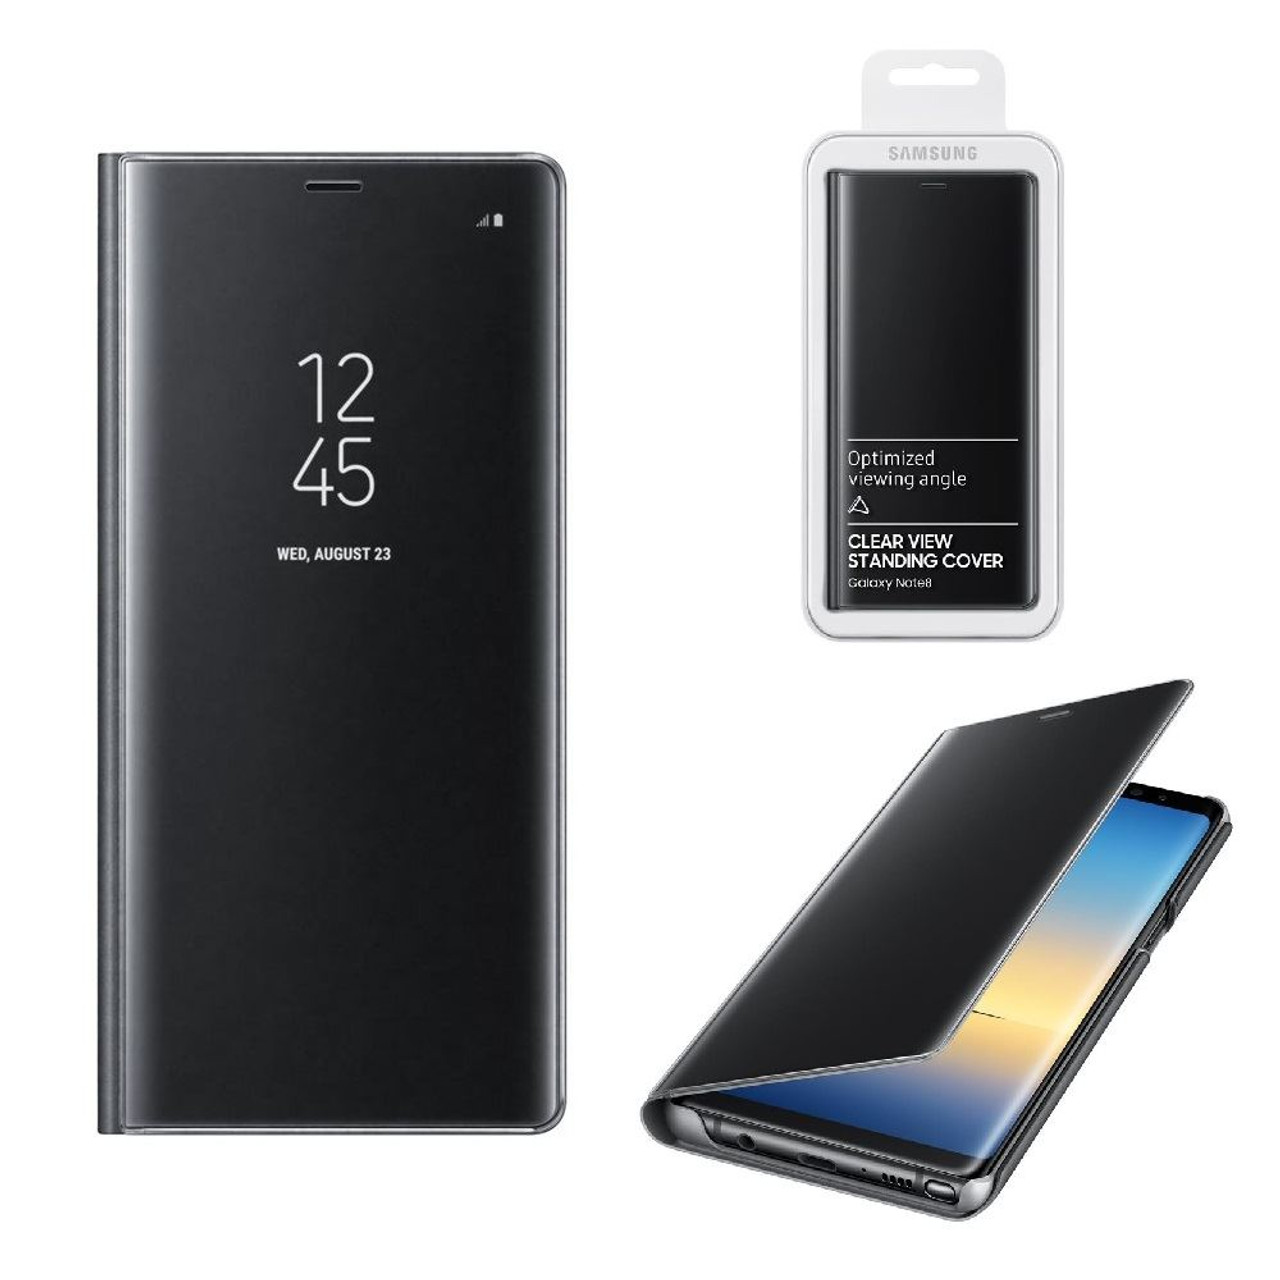 Note 8 оригинал. Samsung Galaxy Note 8 Clear view standing. Samsung Note 8 чехол Clear view. Official Samsung Galaxy Note 9 Clear view standing Cover. Samsung Clear view standing Cover.